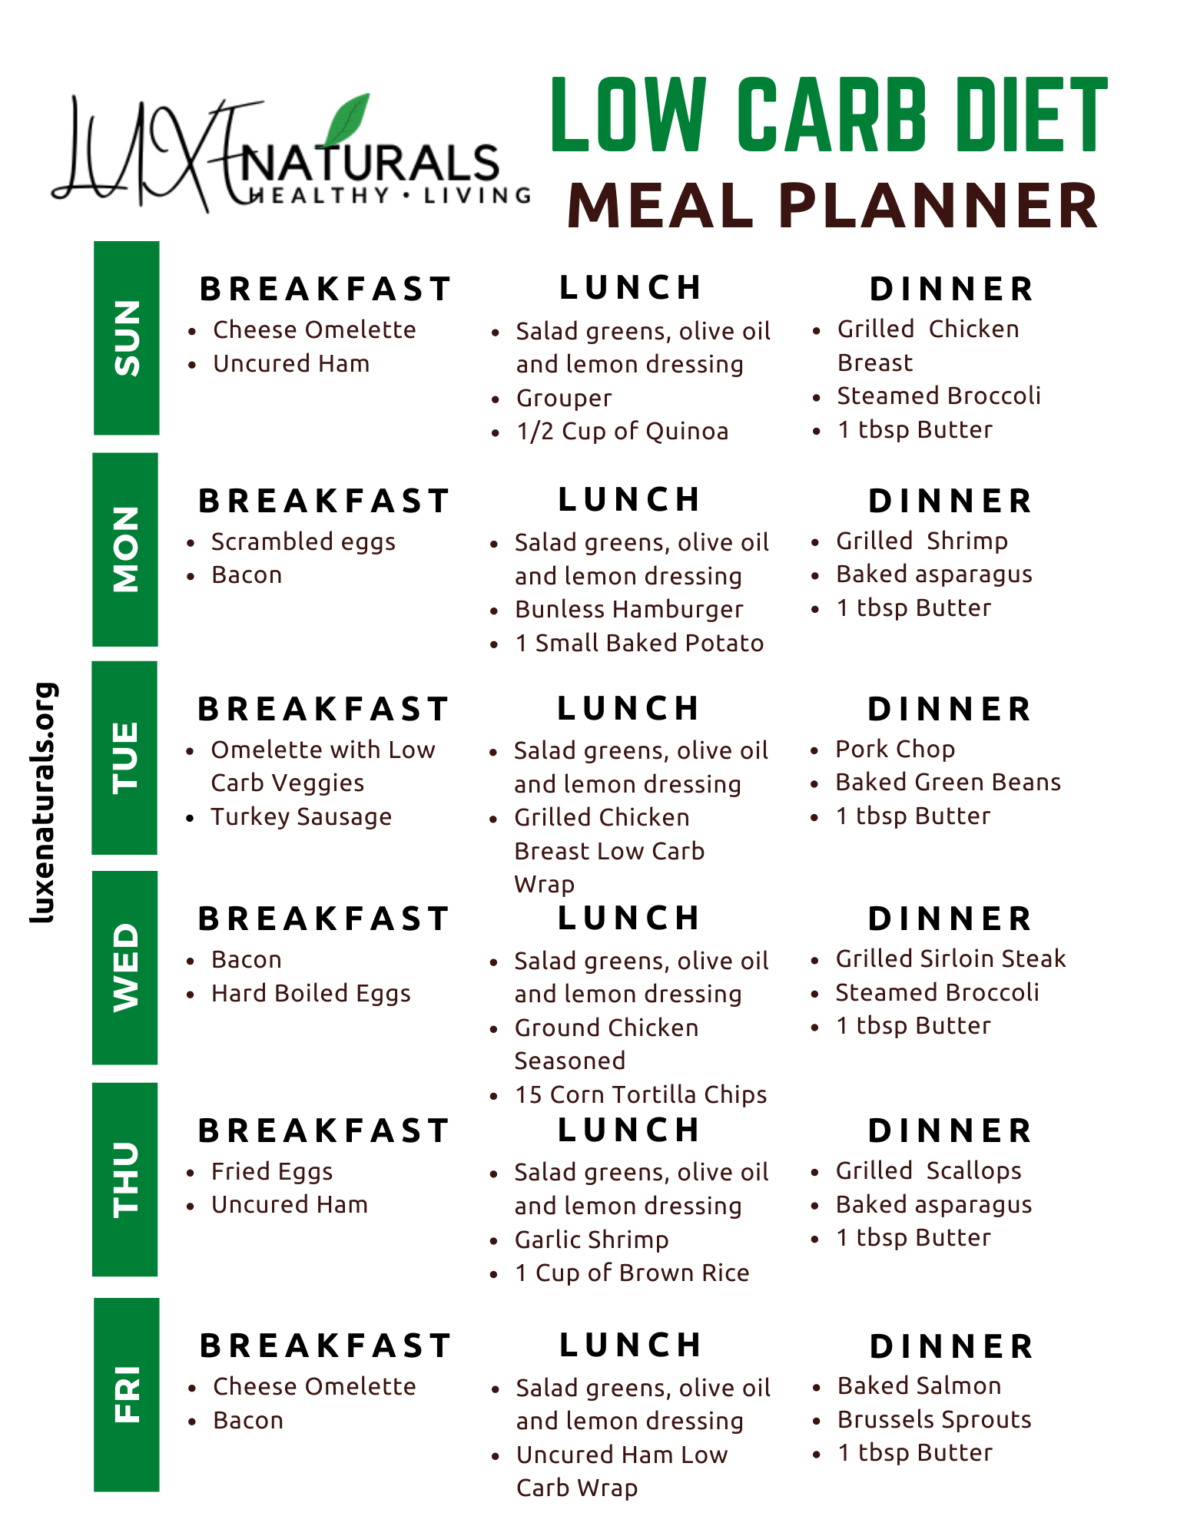 macro meal planner for 1500 calories